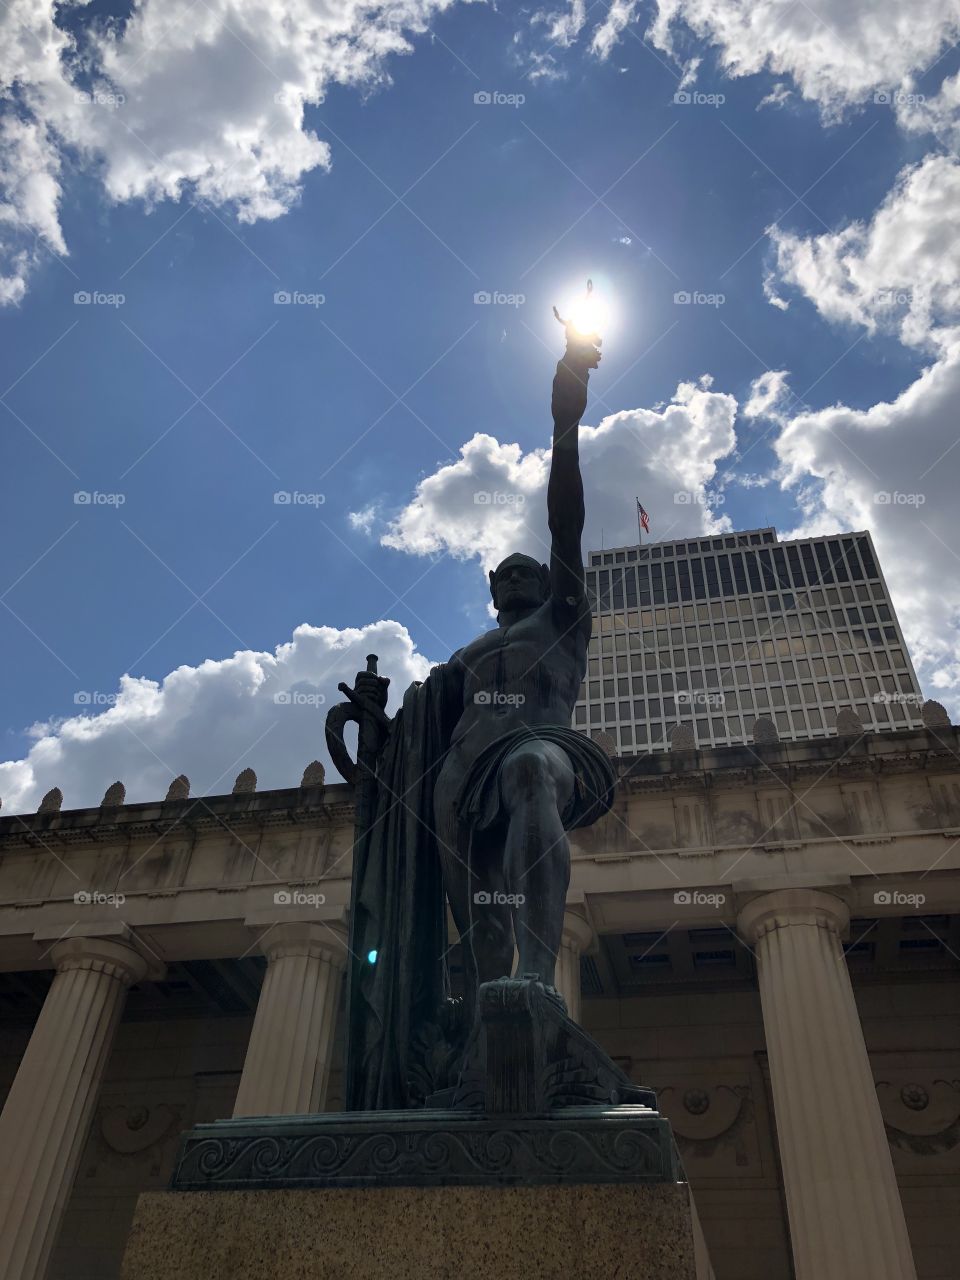 A replica Greek statue stands in the open plaza in Nashville, confidently holding the light of the sun in his hand, purporting his power towards an accredited and successful lifetime.